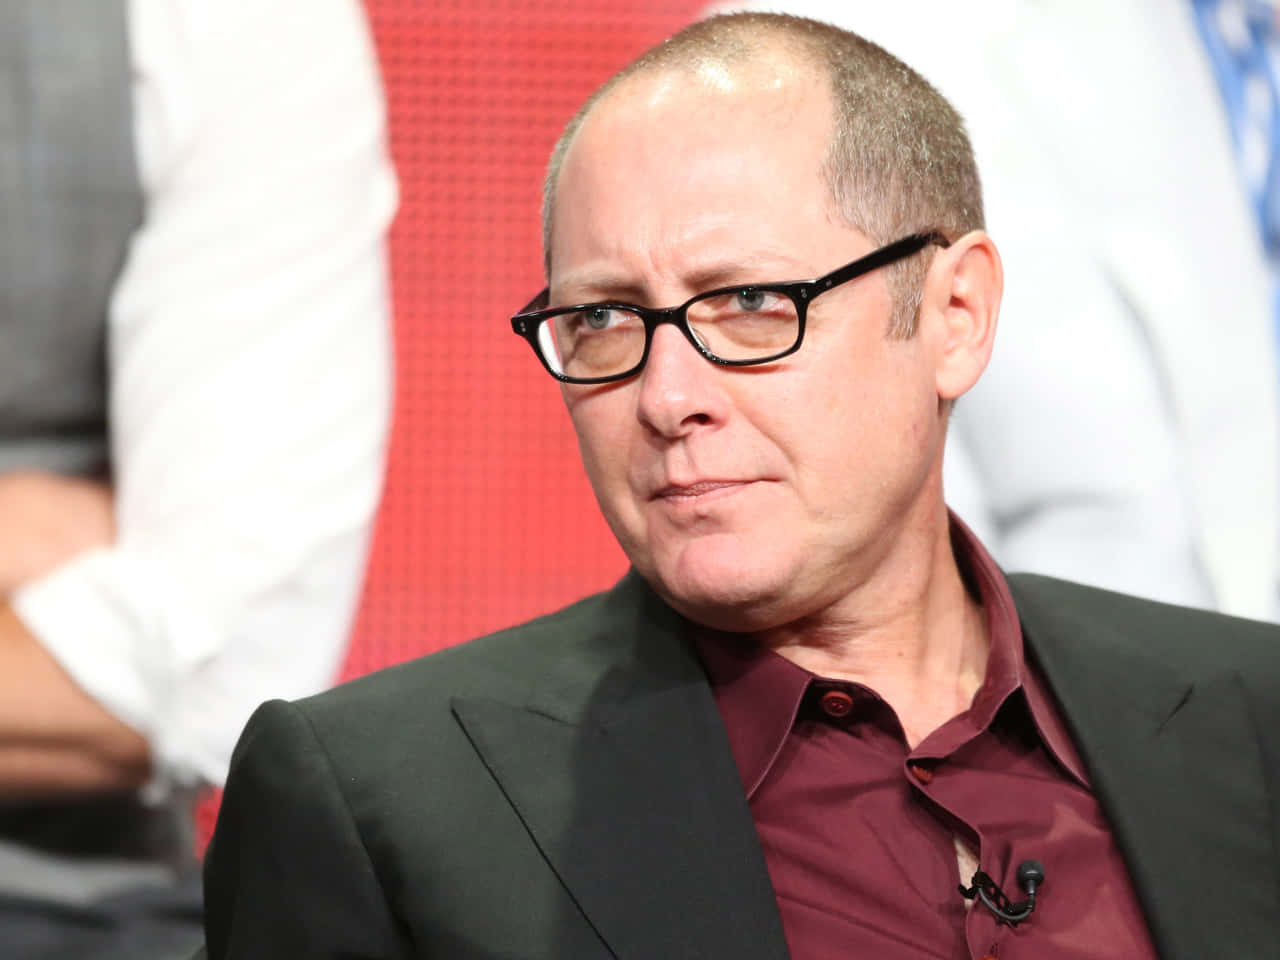 Renowned Actor James Spader In A Classic Portrayal